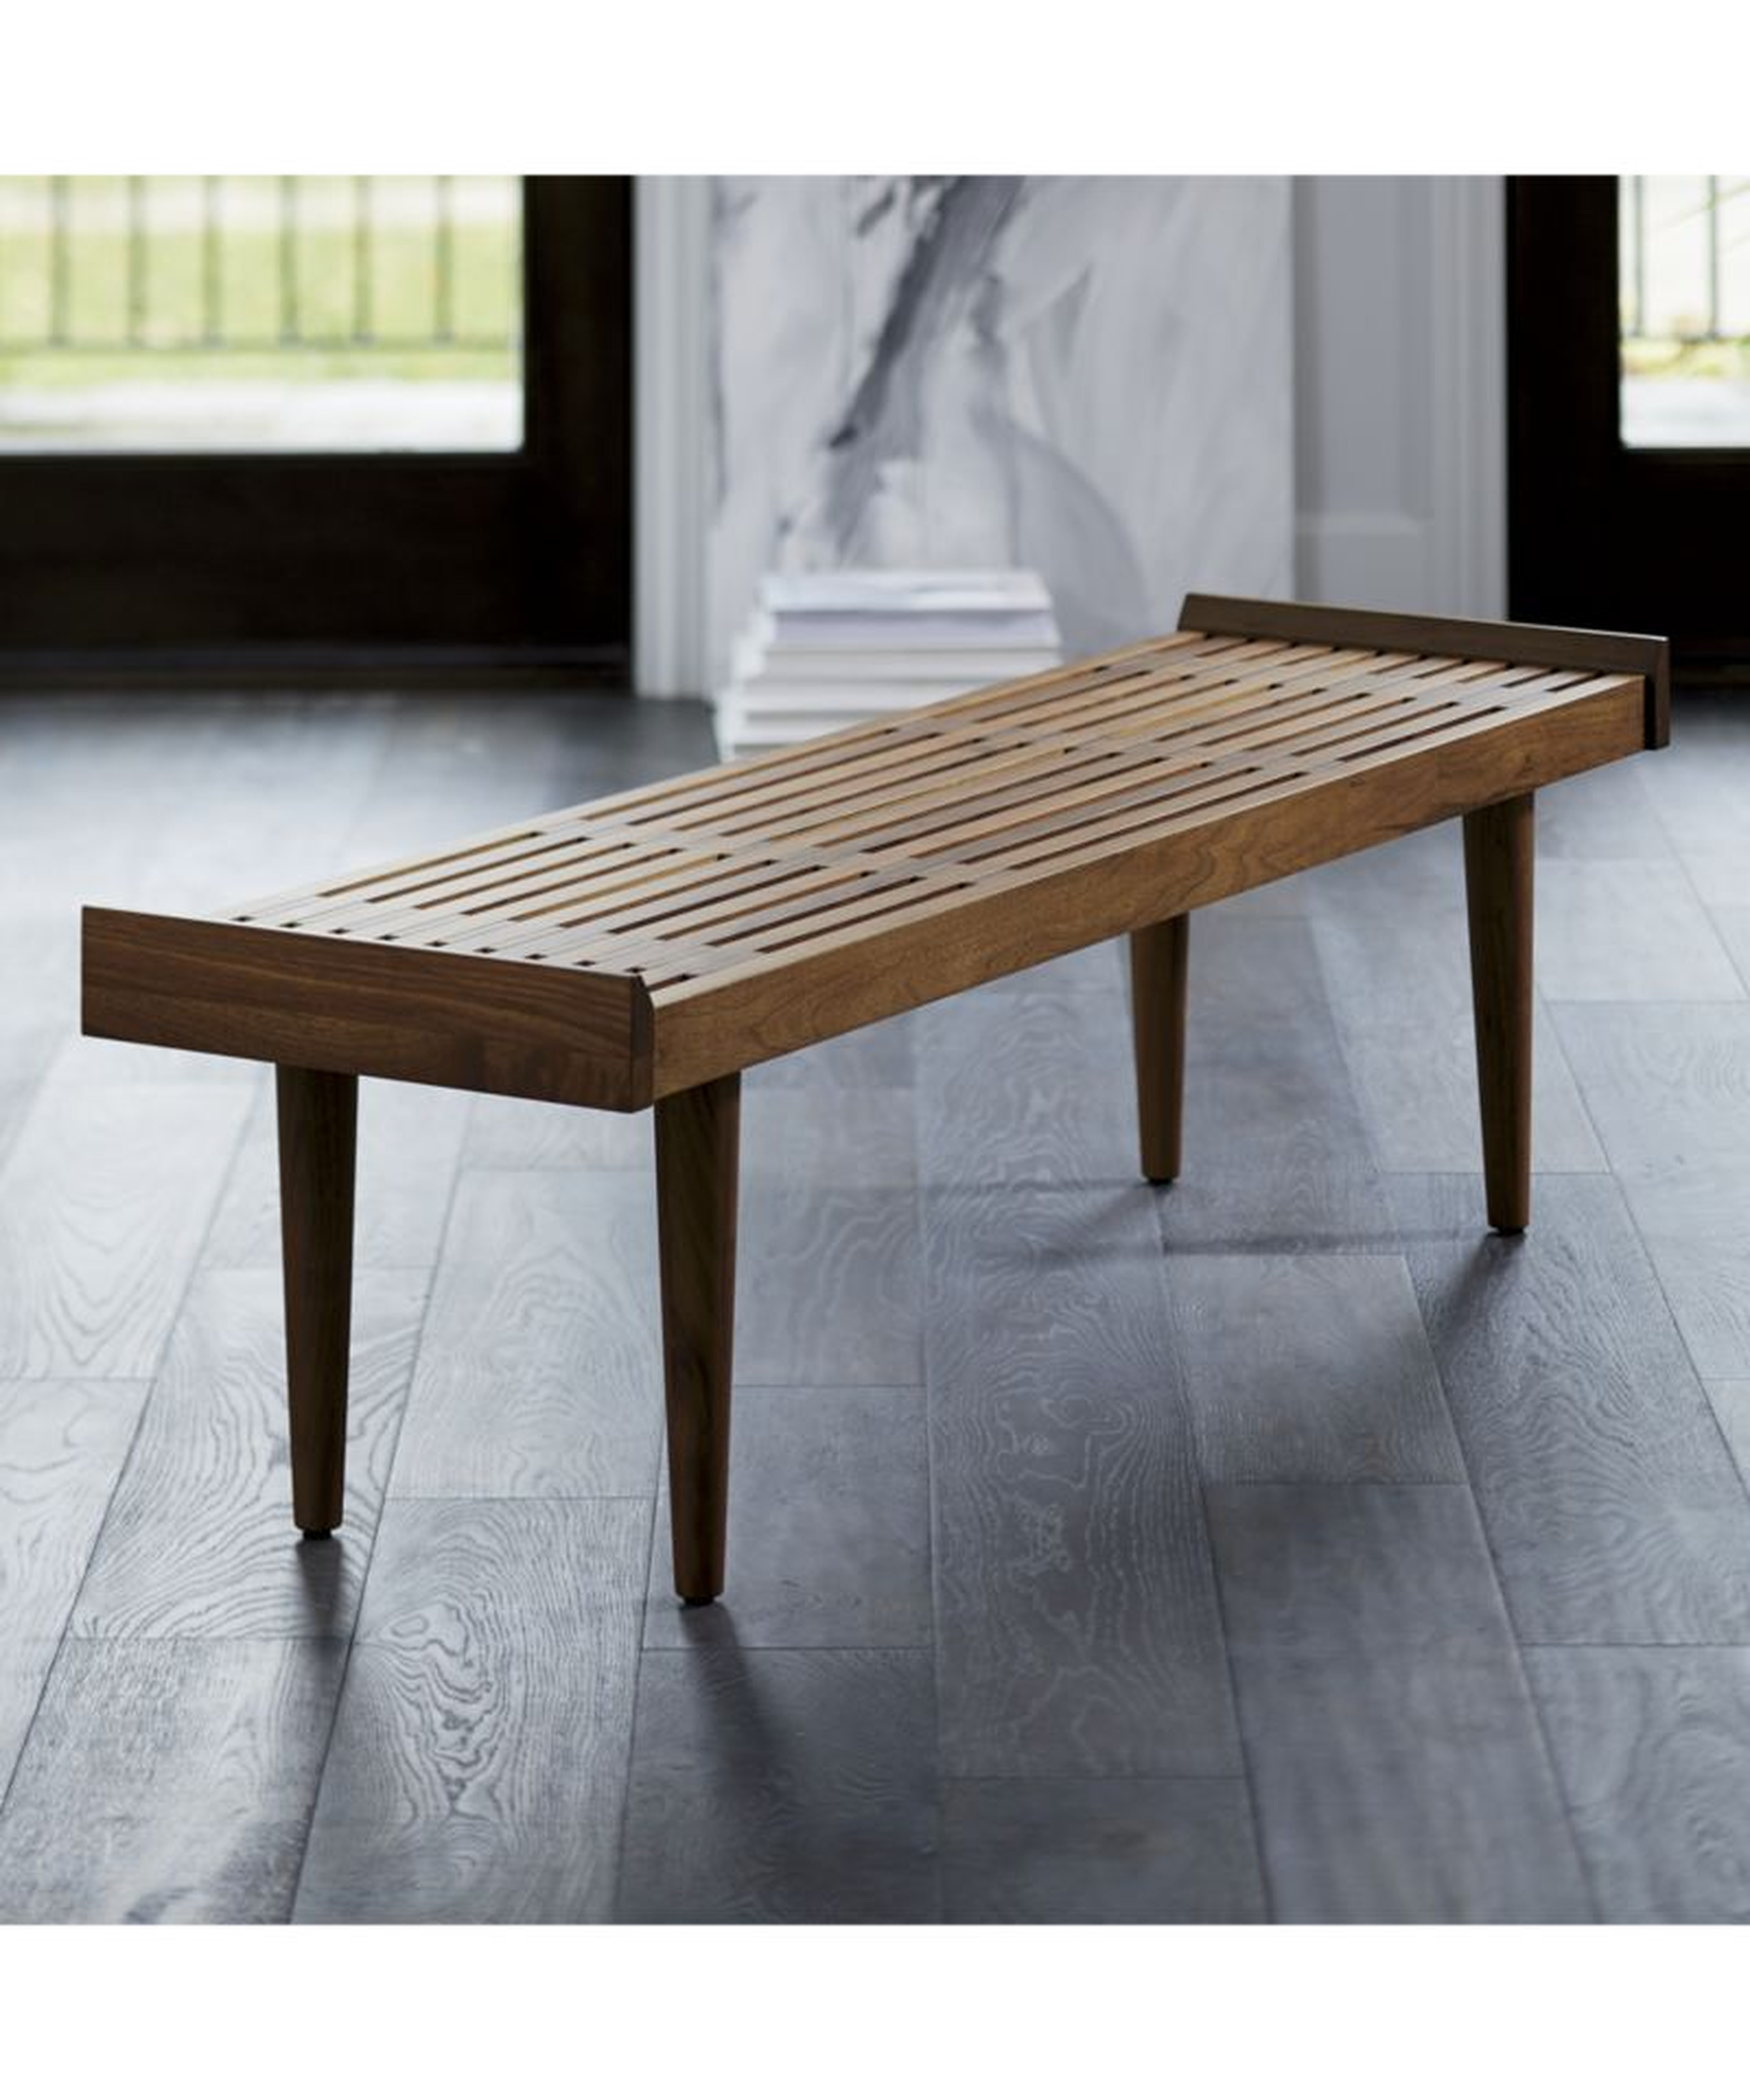 Tate Walnut Slatted Bench - Crate and Barrel